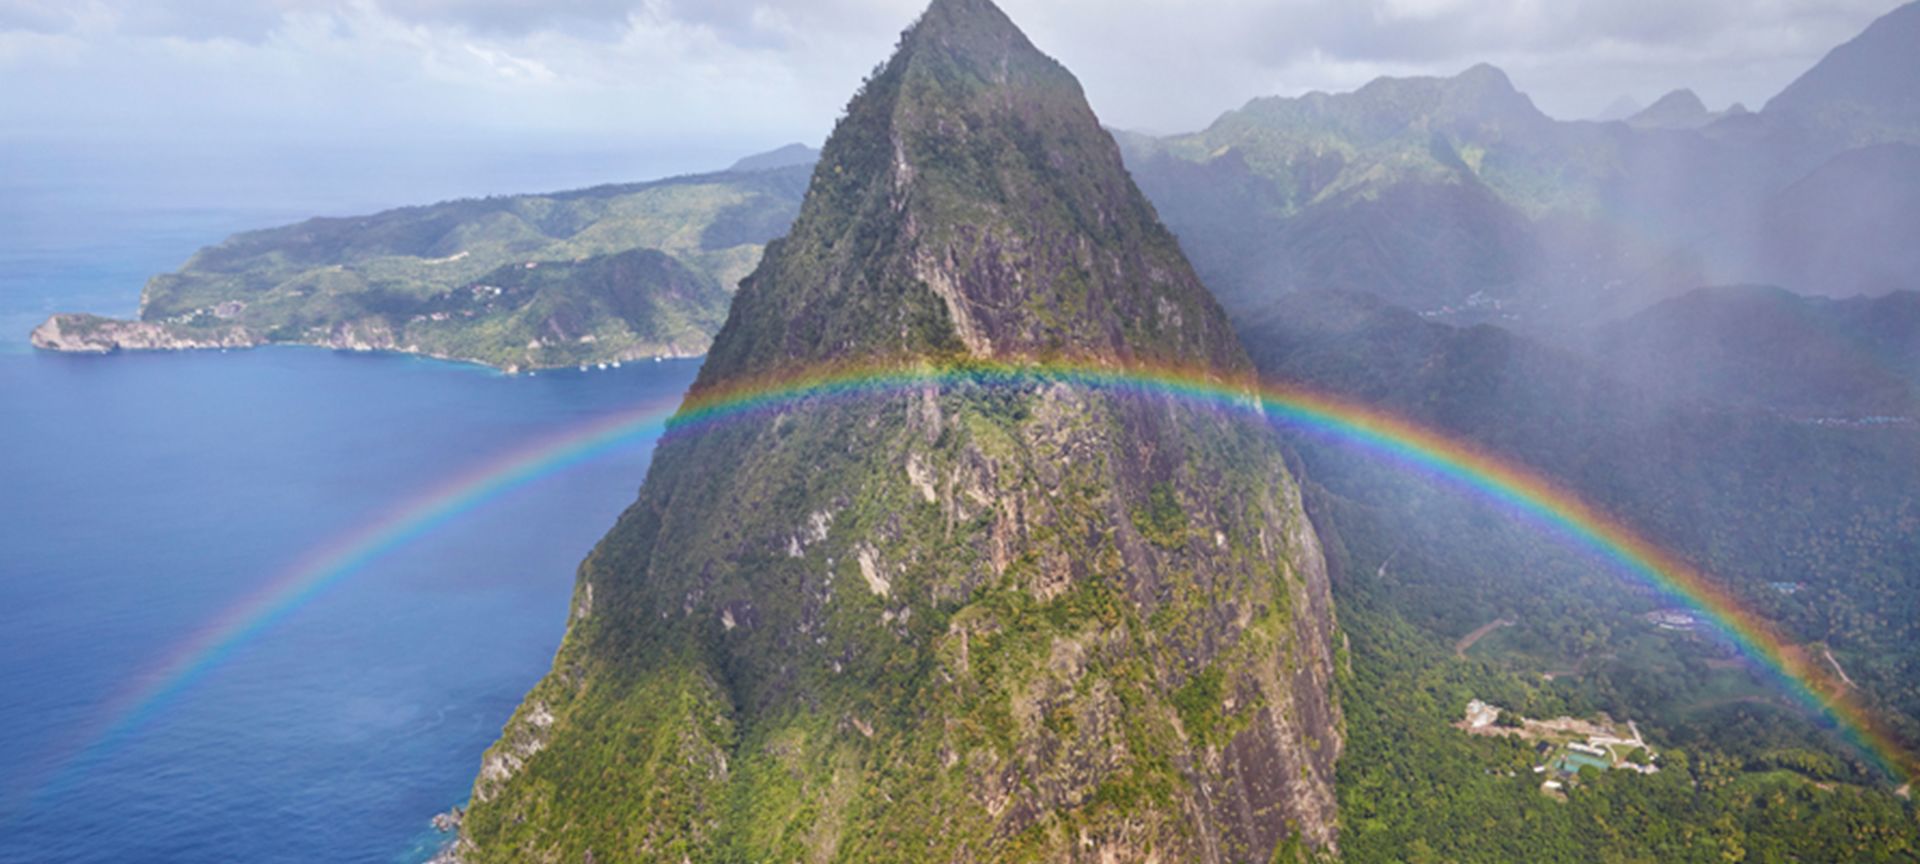 A Rainbow Over A Body Of Water With A Mountain In The Background